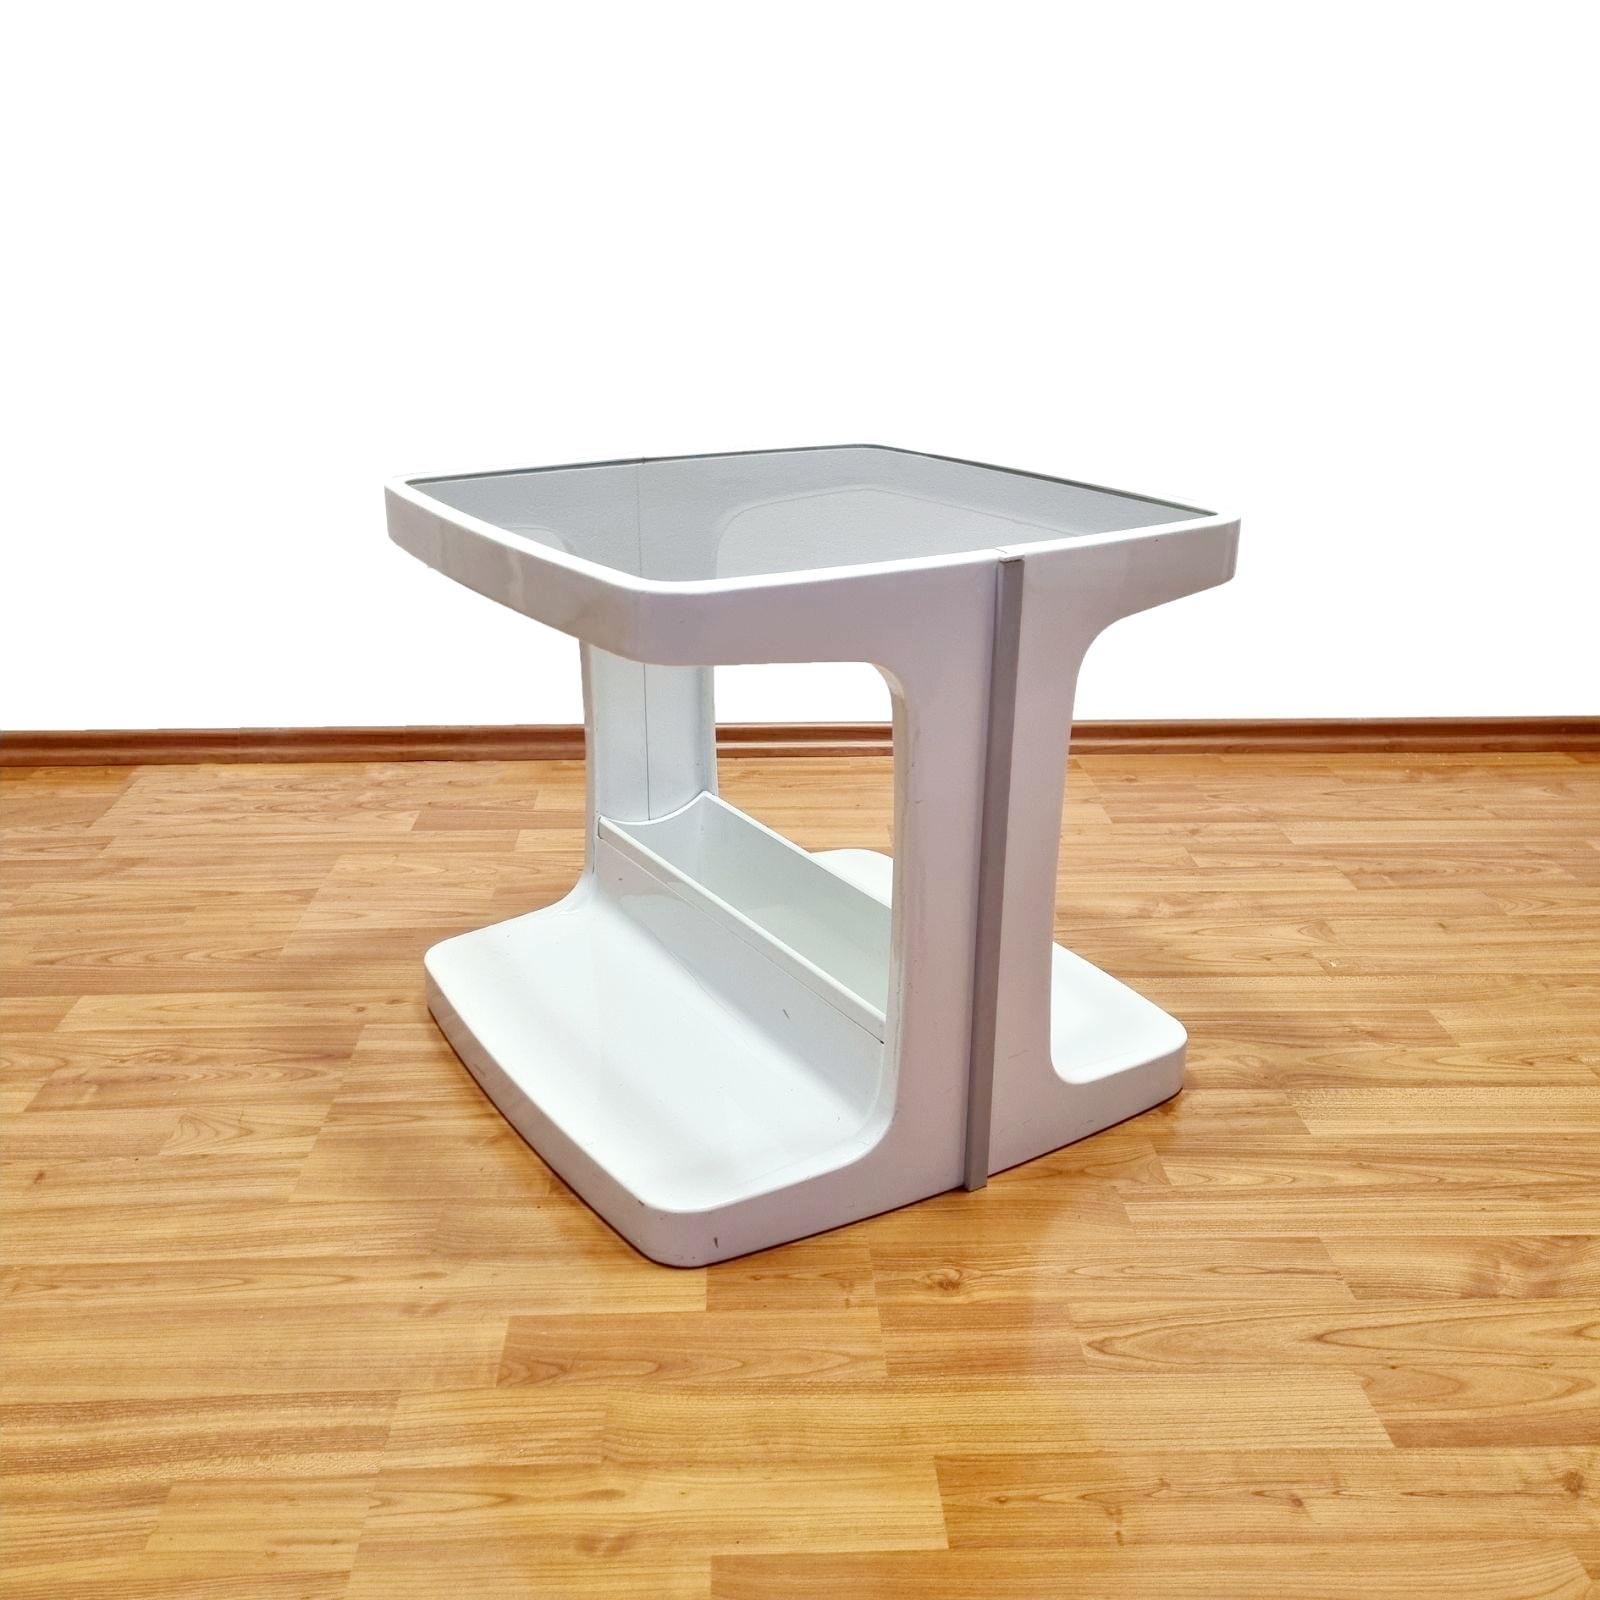 Late 20th Century Mid Century Coffee Table Designed by Marc Held for Prisunic, France 70s For Sale